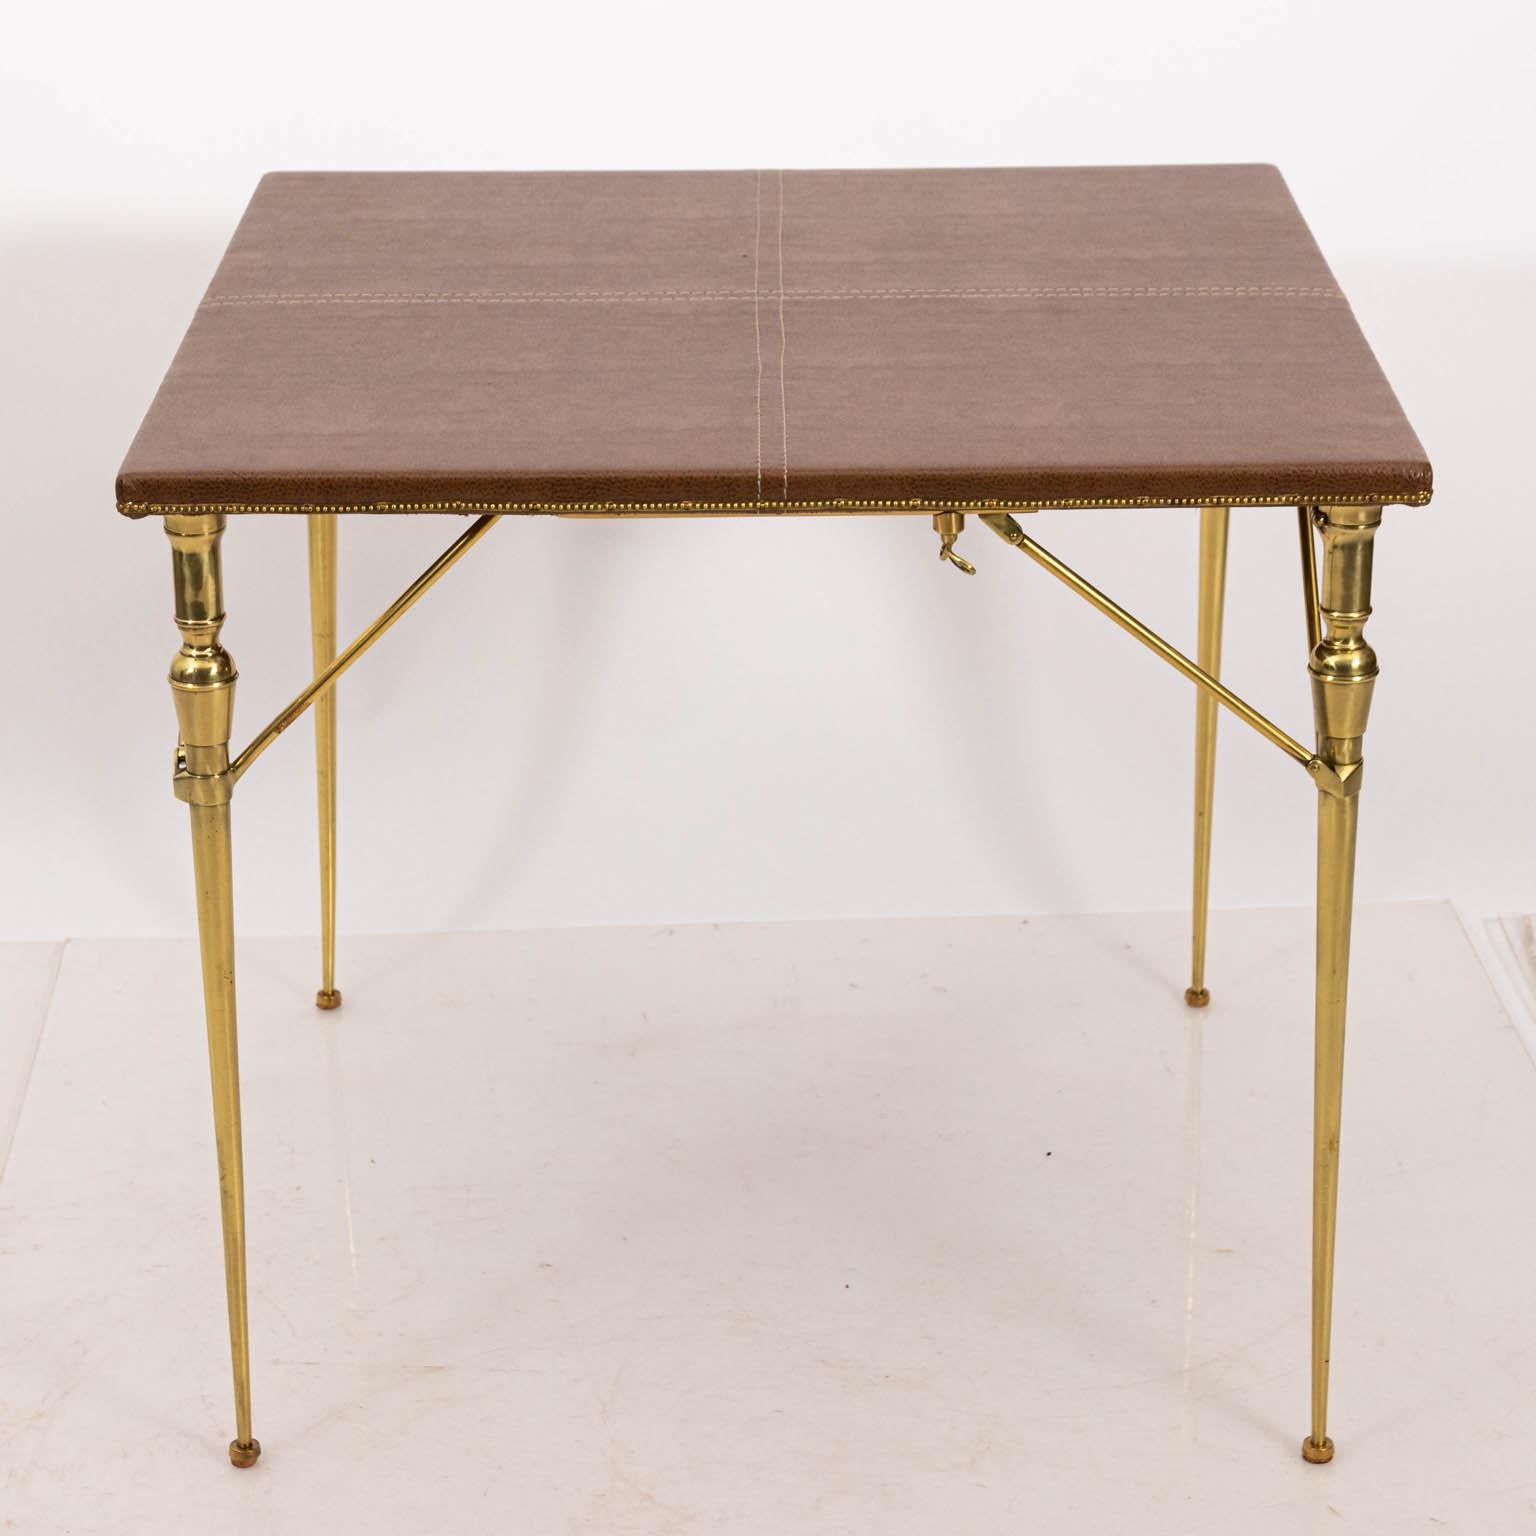 French folding game table in brass and wood with a faux leather top, circa 1930s. The piece also features top stitching with original gold trim throughout. Made in France. Please note of wear consistent with age with newly reupholstered top and